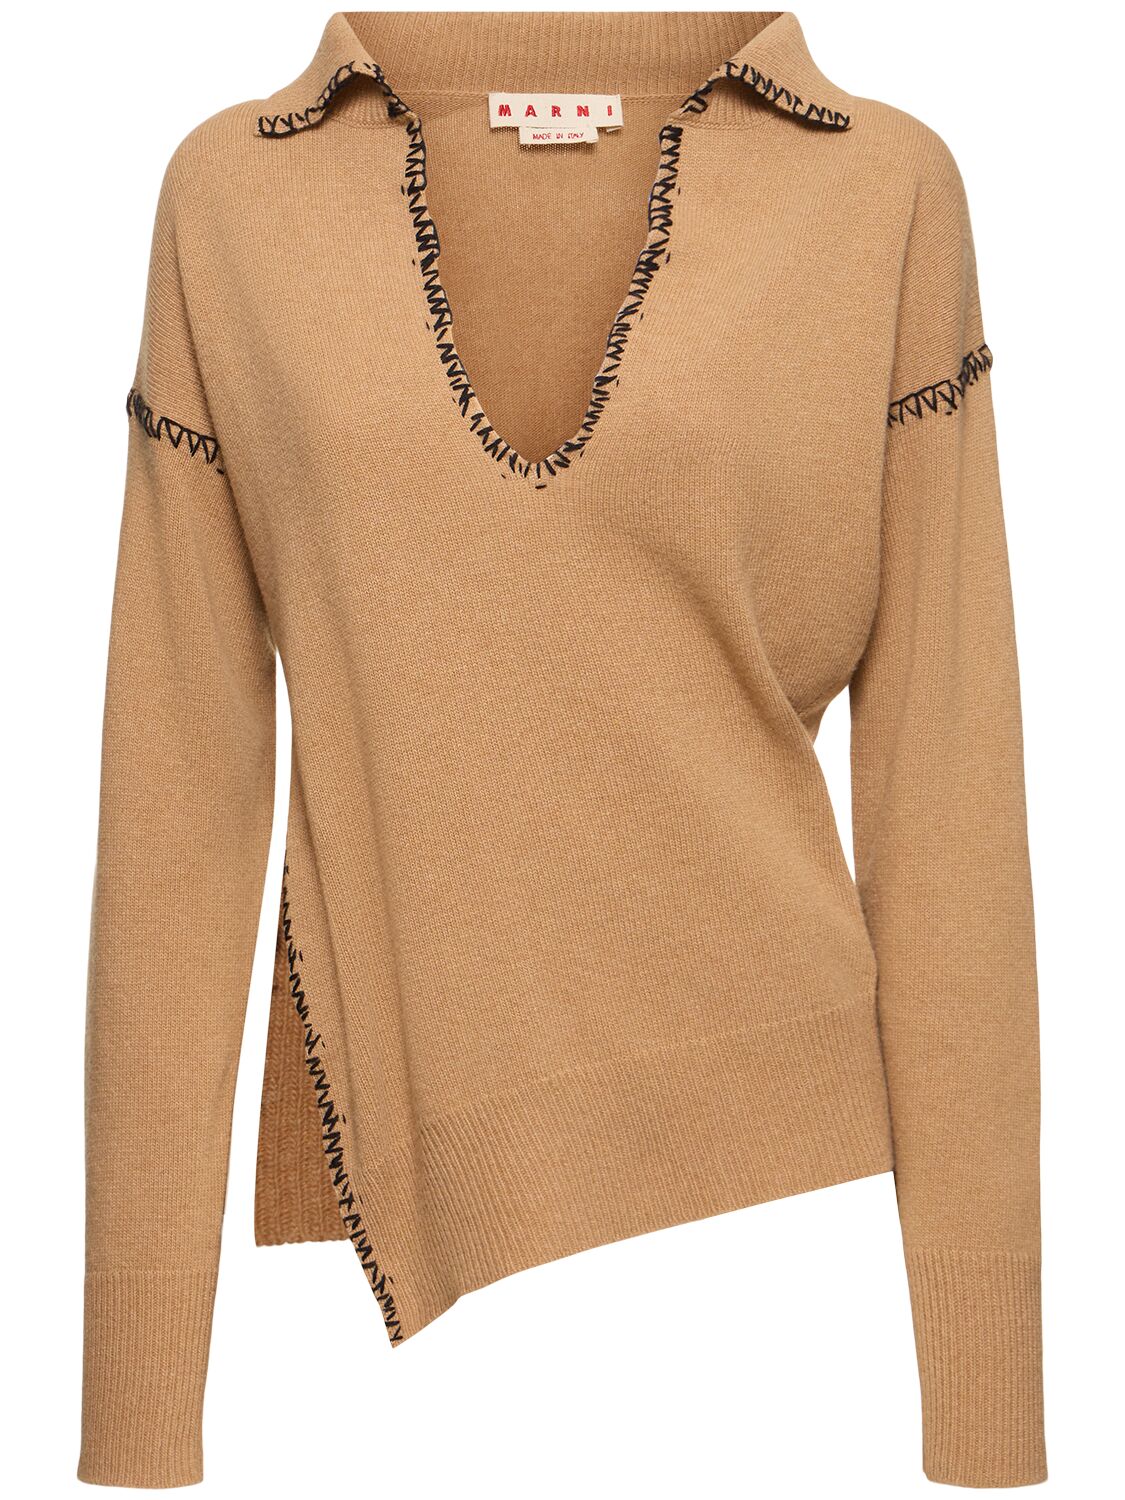 Marni Wool & Cashmere Knit V Neck Polo Sweater In Brown